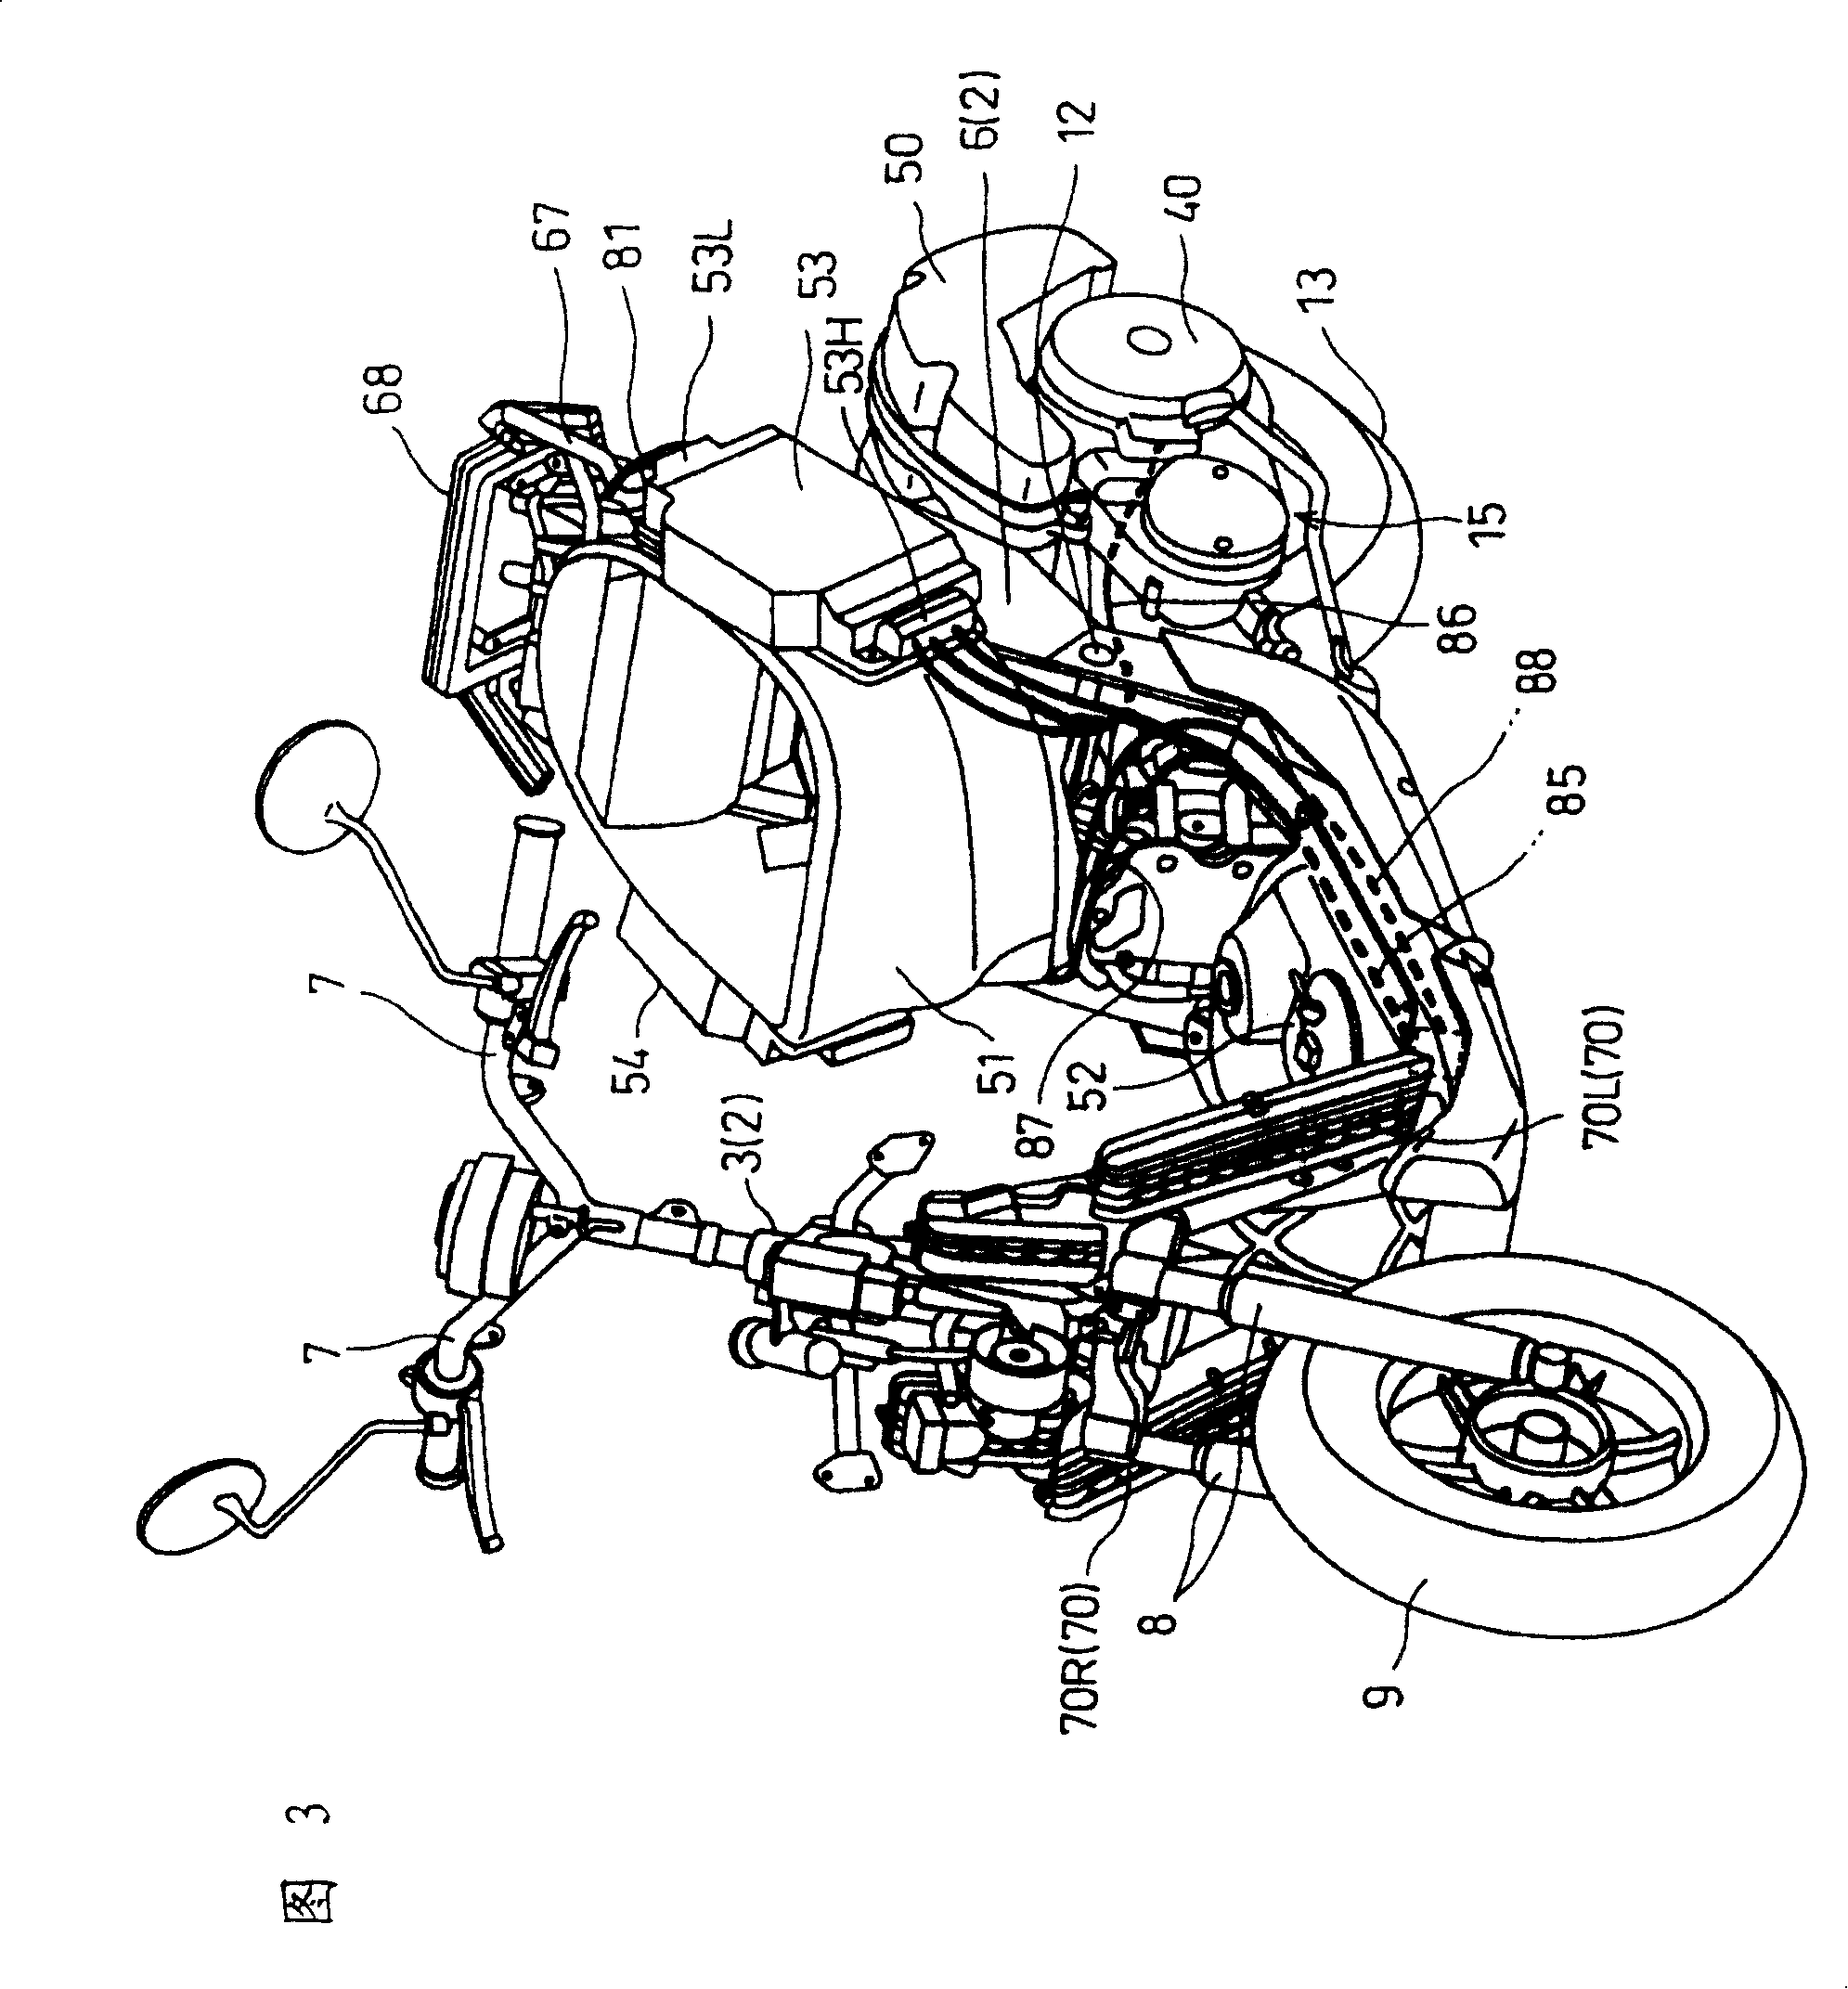 The wiring harness structure of electric motorcycle